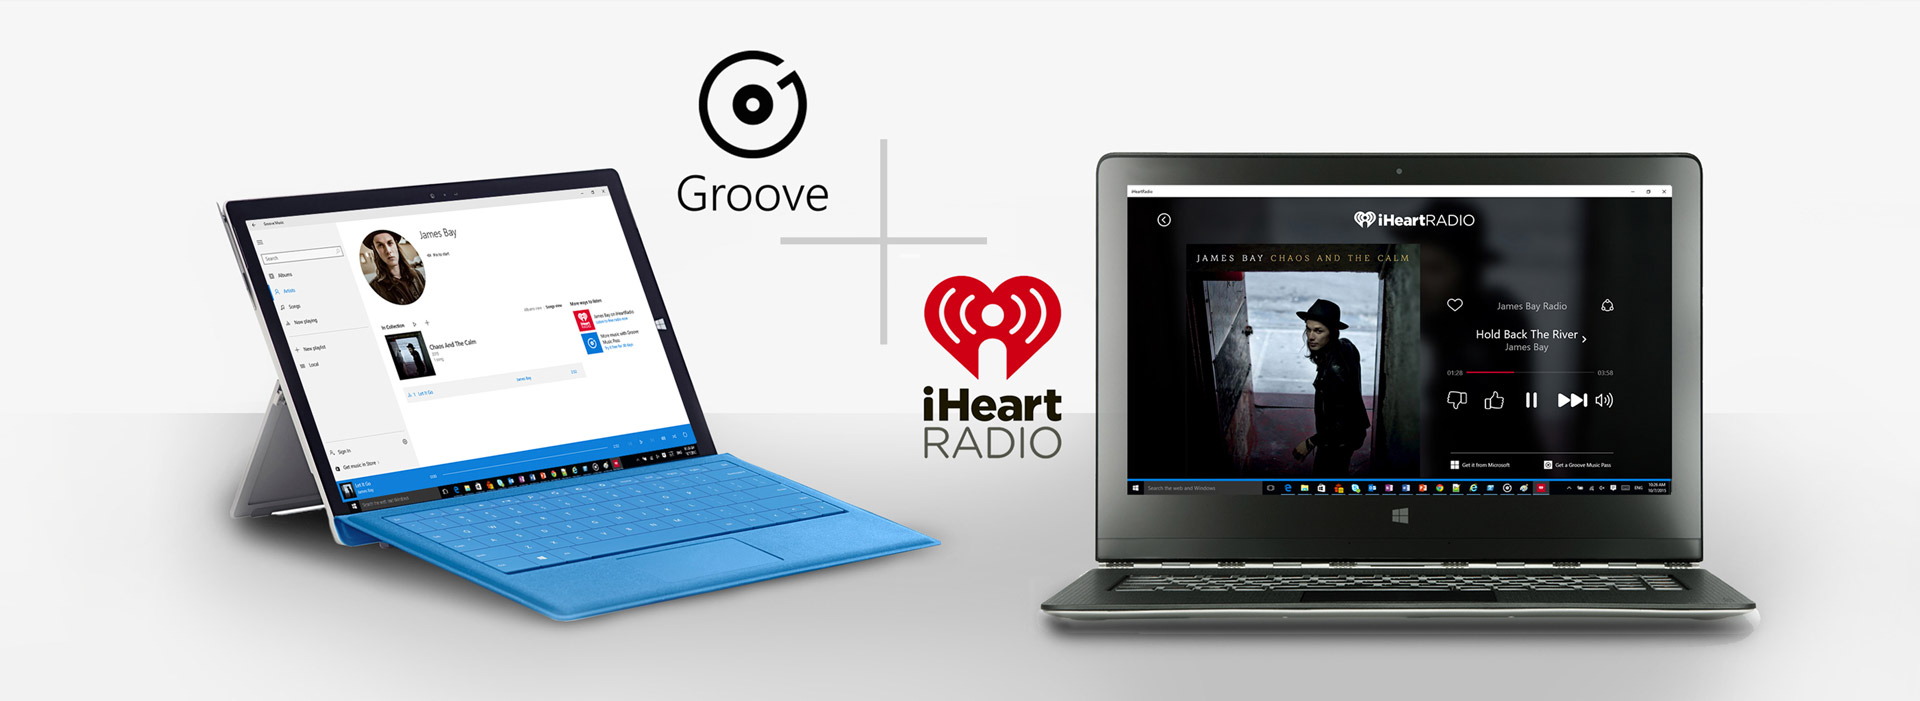 Microsoft’s Groove Music Integrates With iHeartRadio